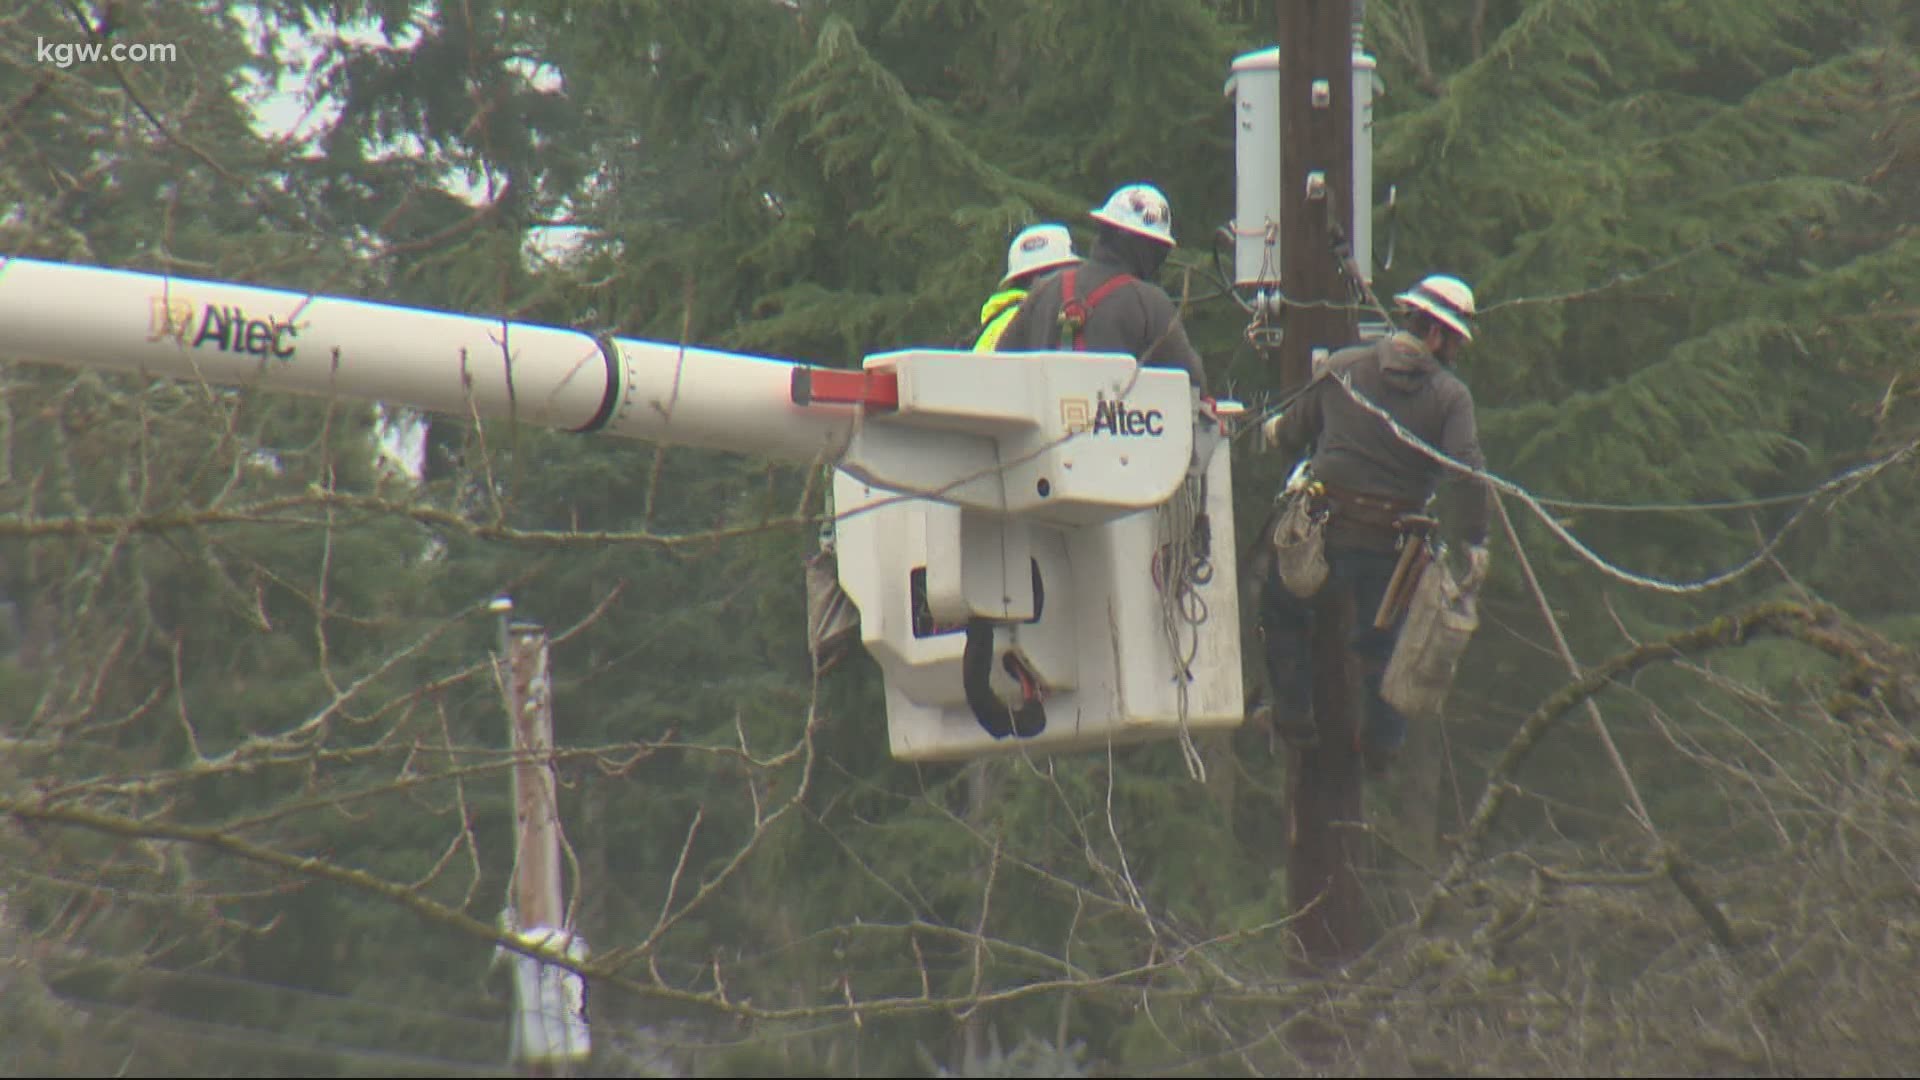 PGE crews are still working to restore power to thousands. Tim Gordon has the latest.